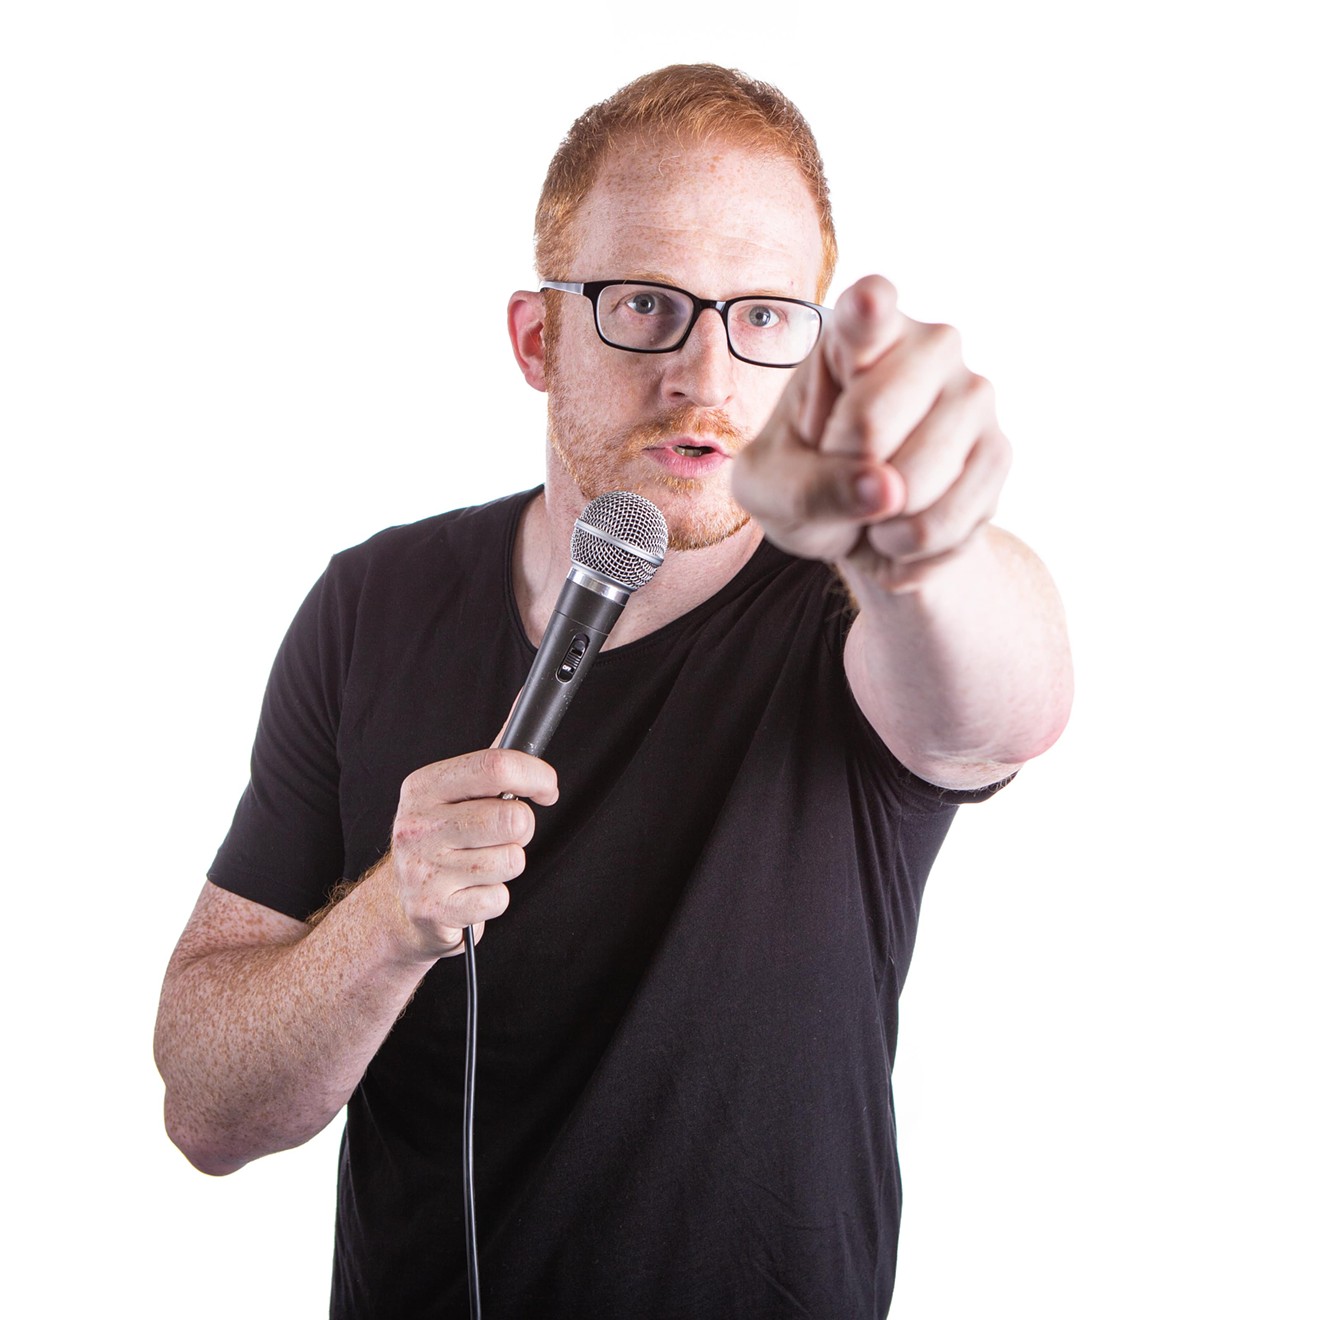 Comedian Steve Hofstetter will perform at this year's virtual Plano Comedy Festival on Saturday.